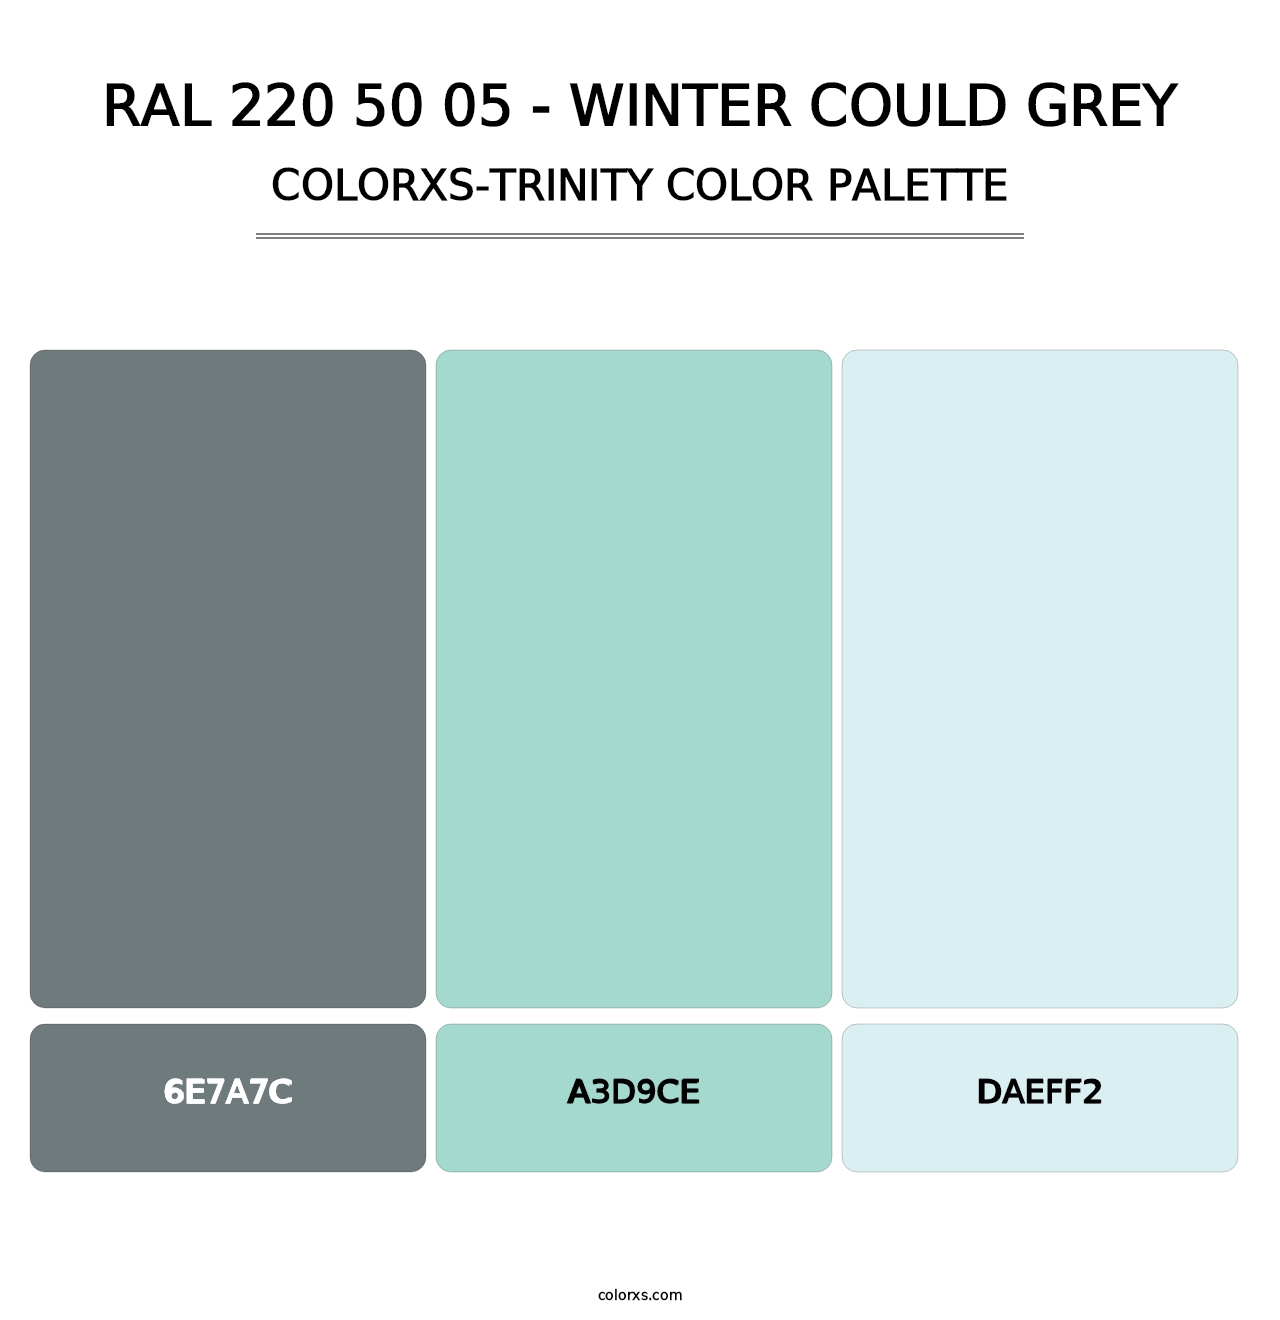 RAL 220 50 05 - Winter Could Grey - Colorxs Trinity Palette